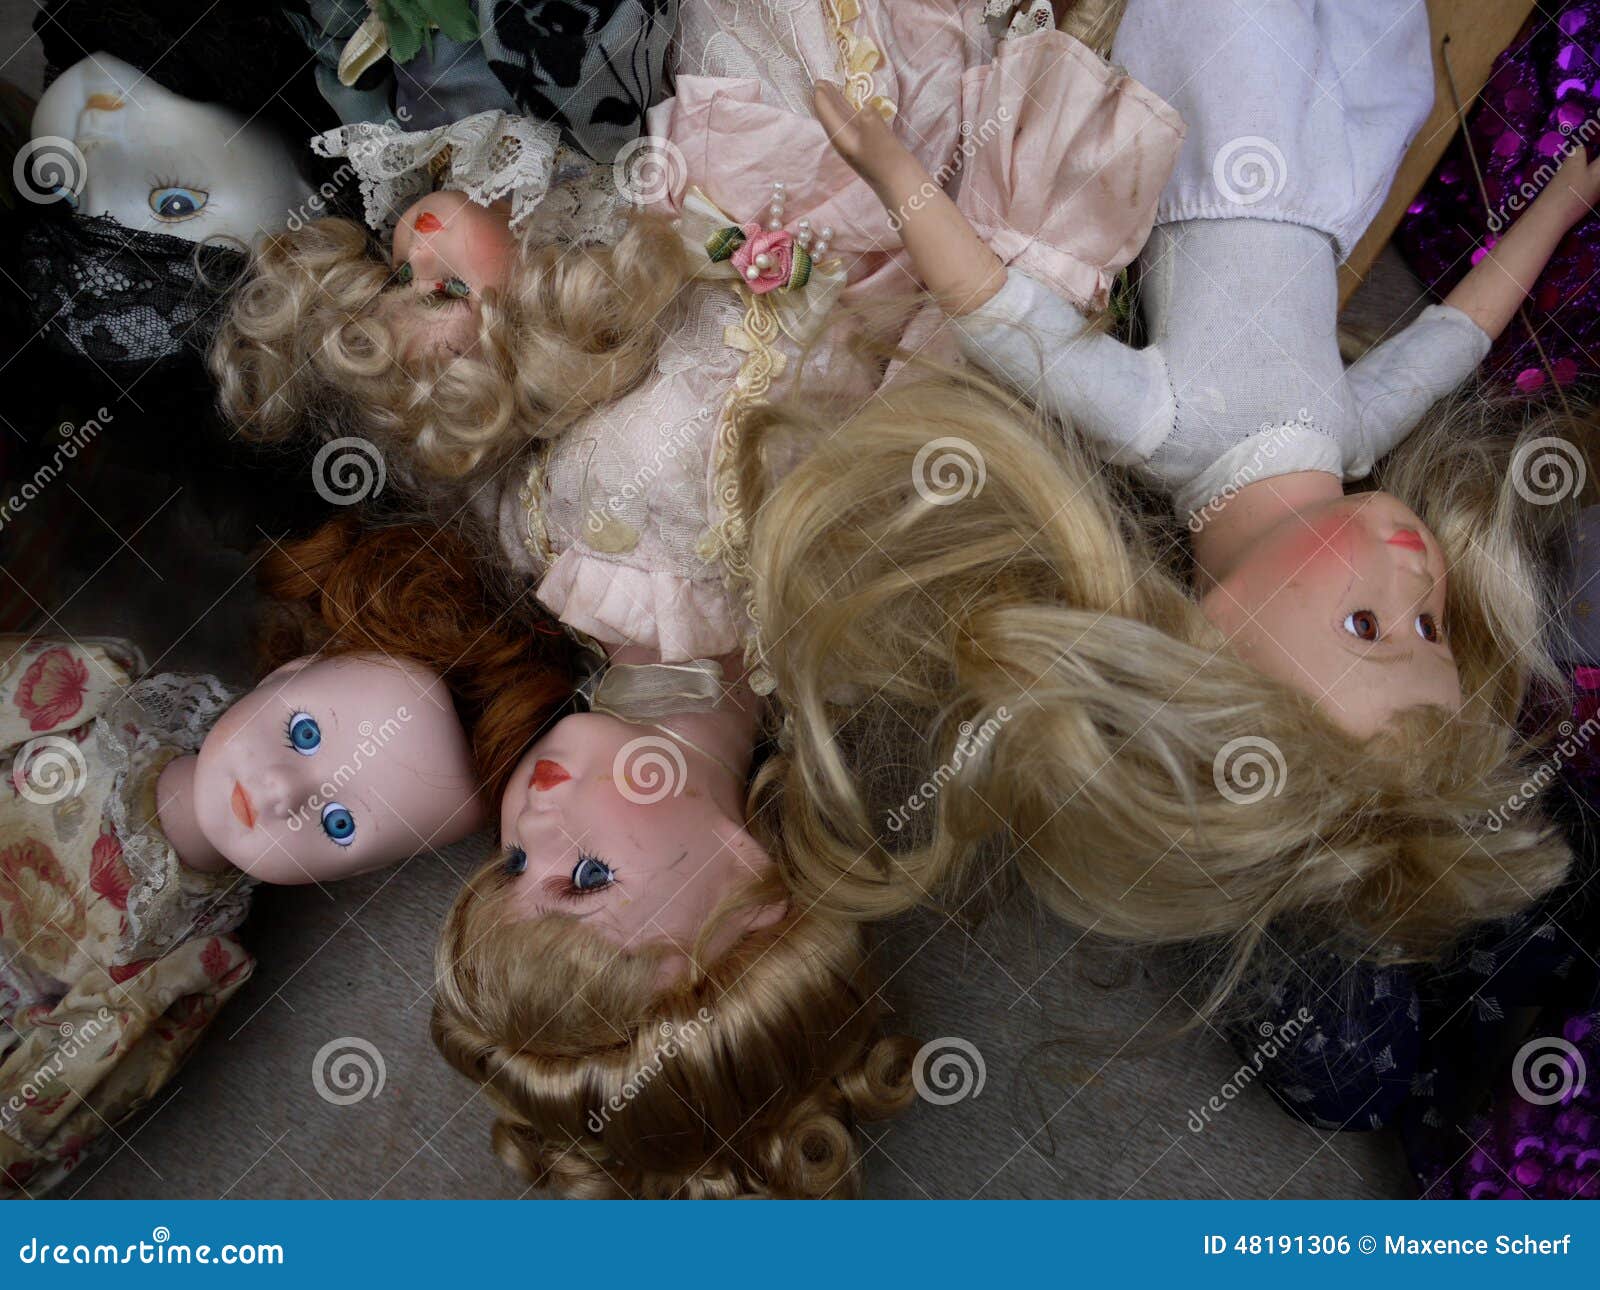 where can i sell old dolls